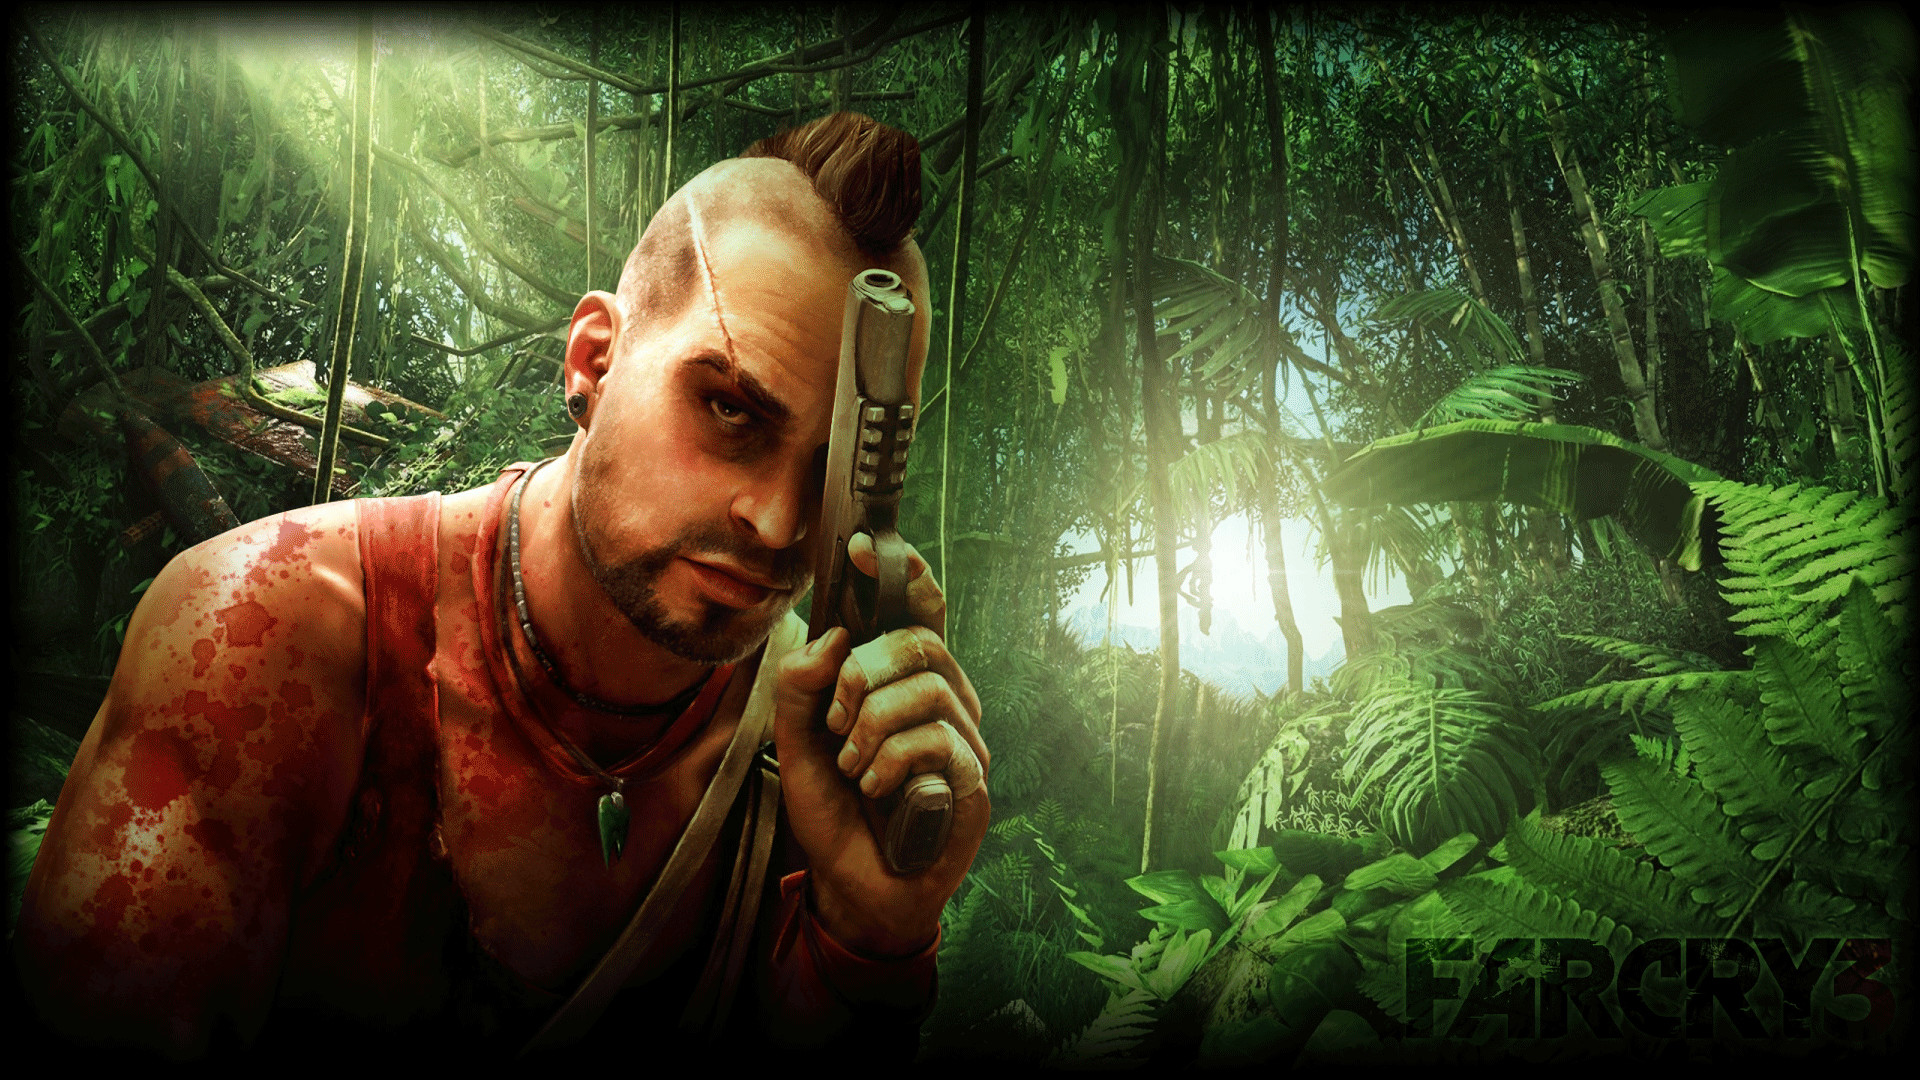 1920x1080 HQ  px Resolution Far Cry 3 #779820747 - KB.iPT PC Wallpapers